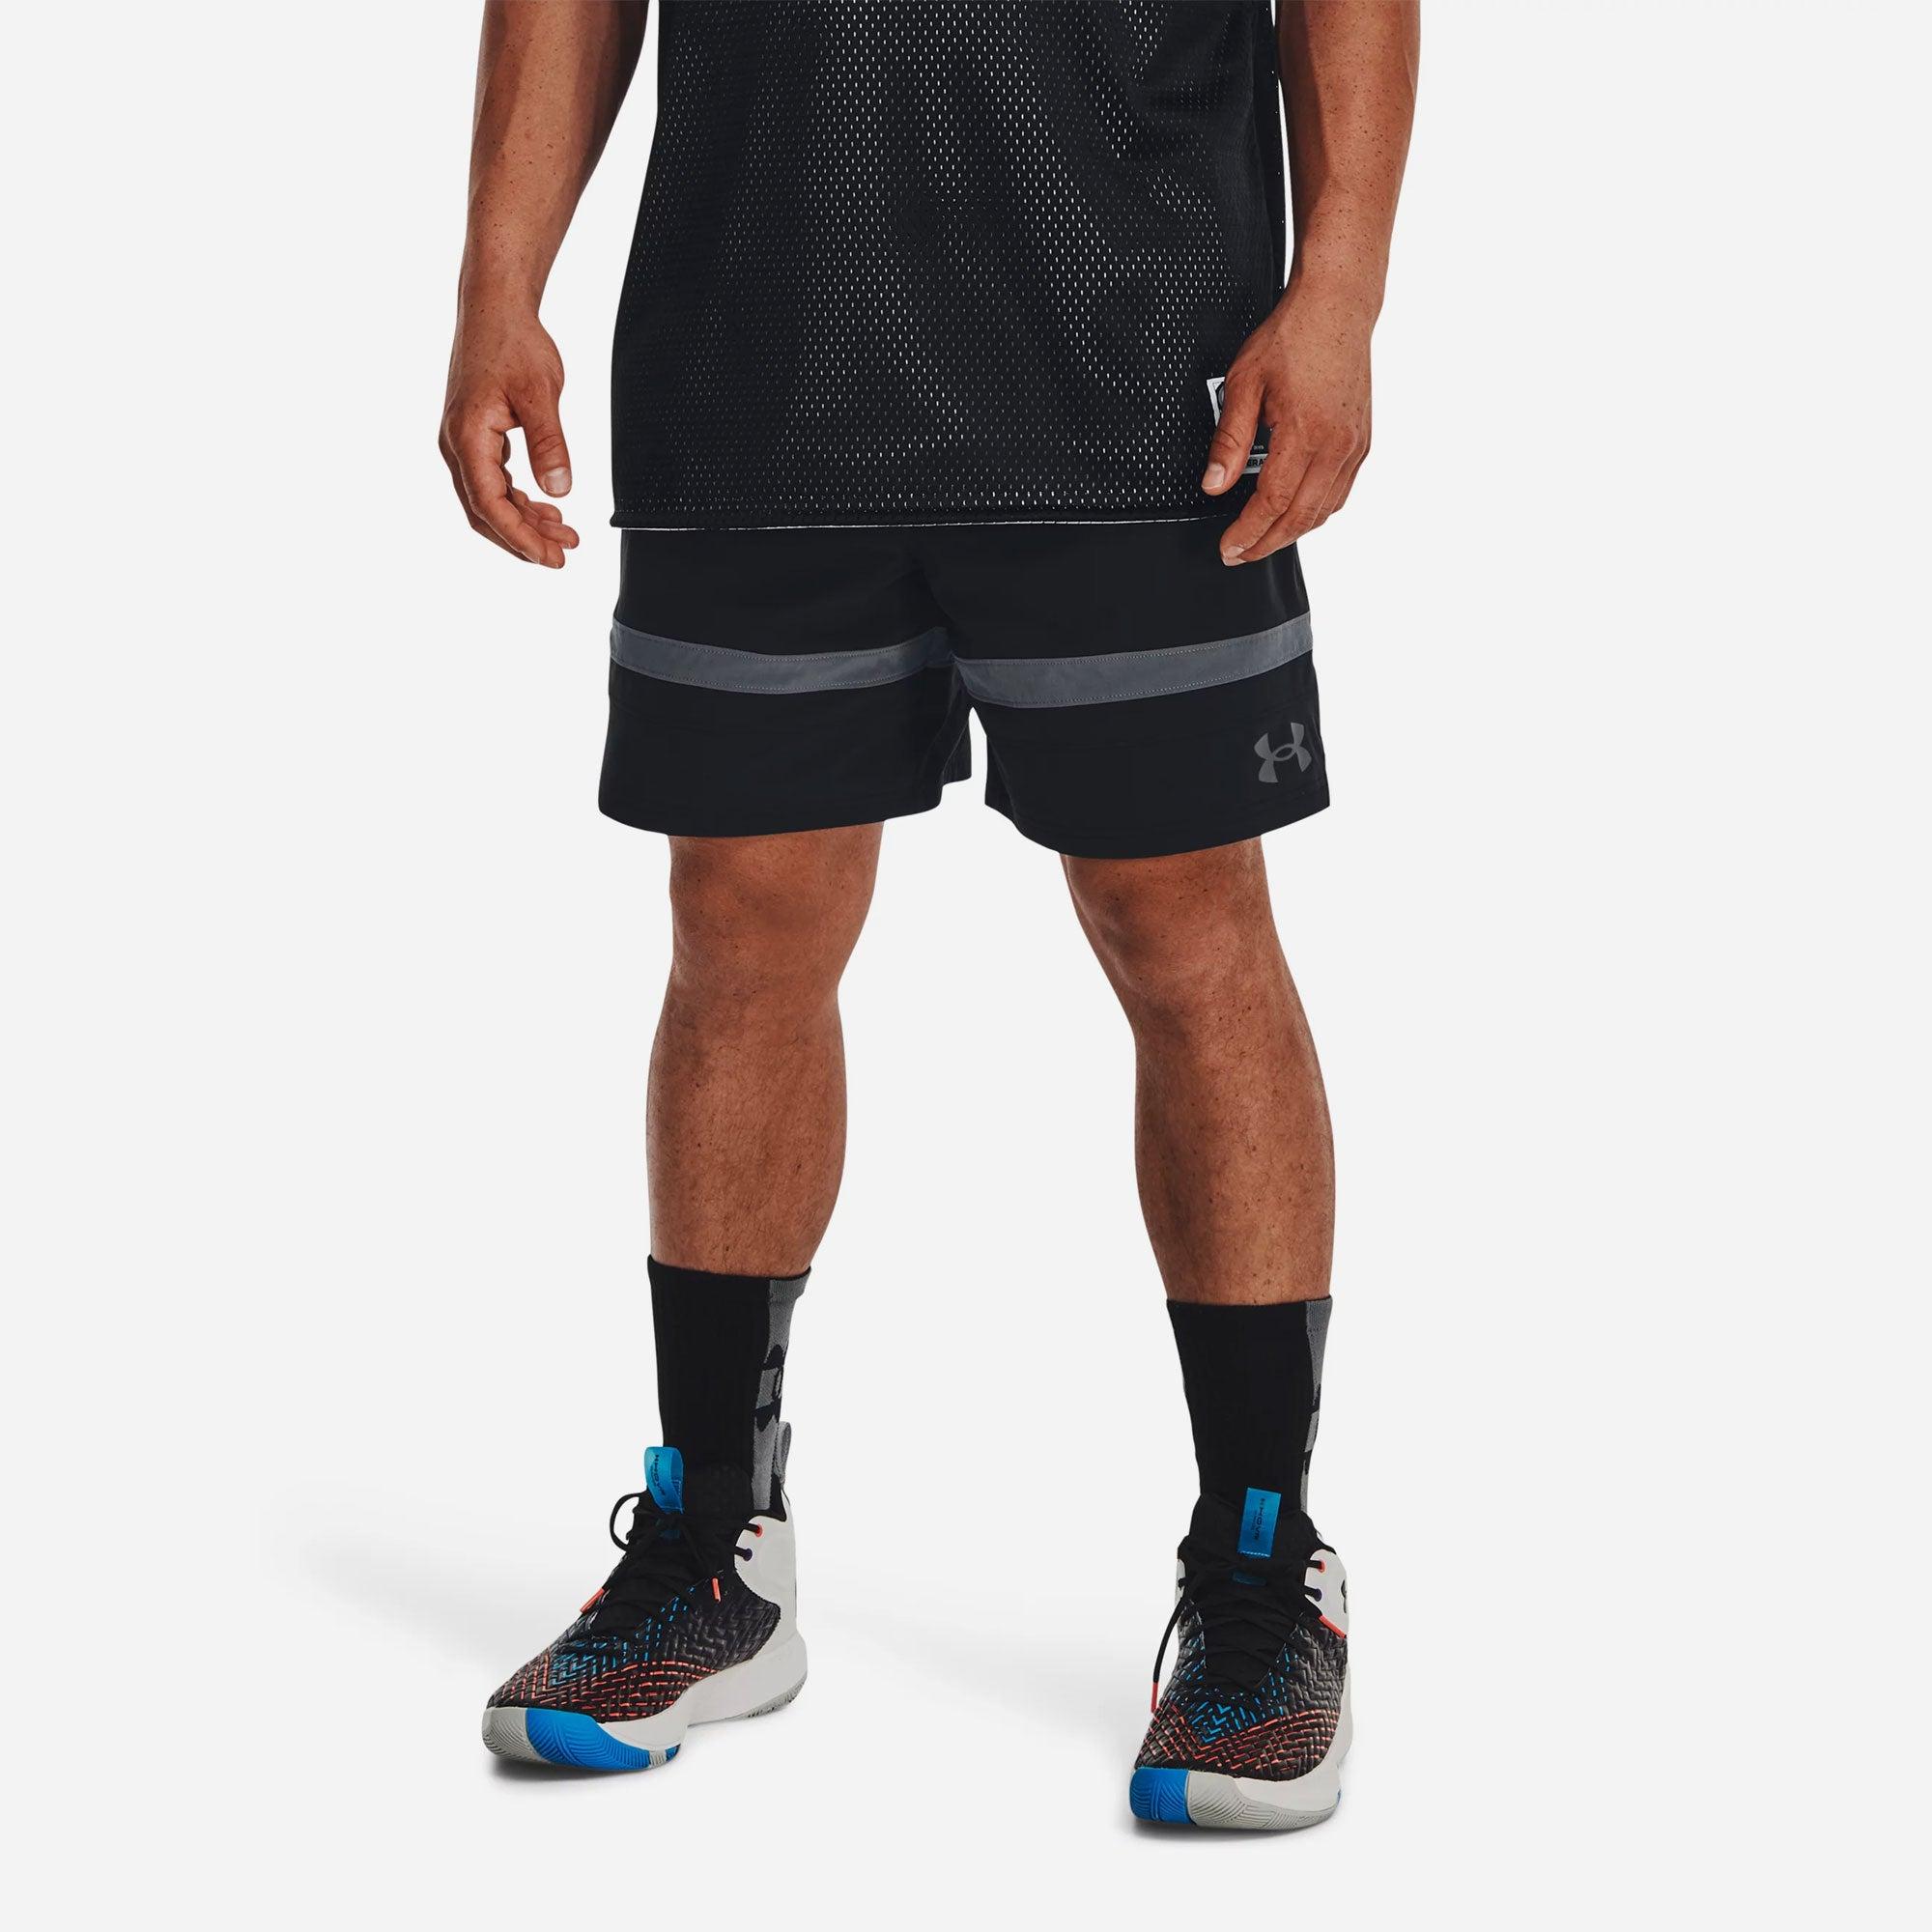 Quần ngắn thể thao nam Under Armour Baseline - 1377309-001